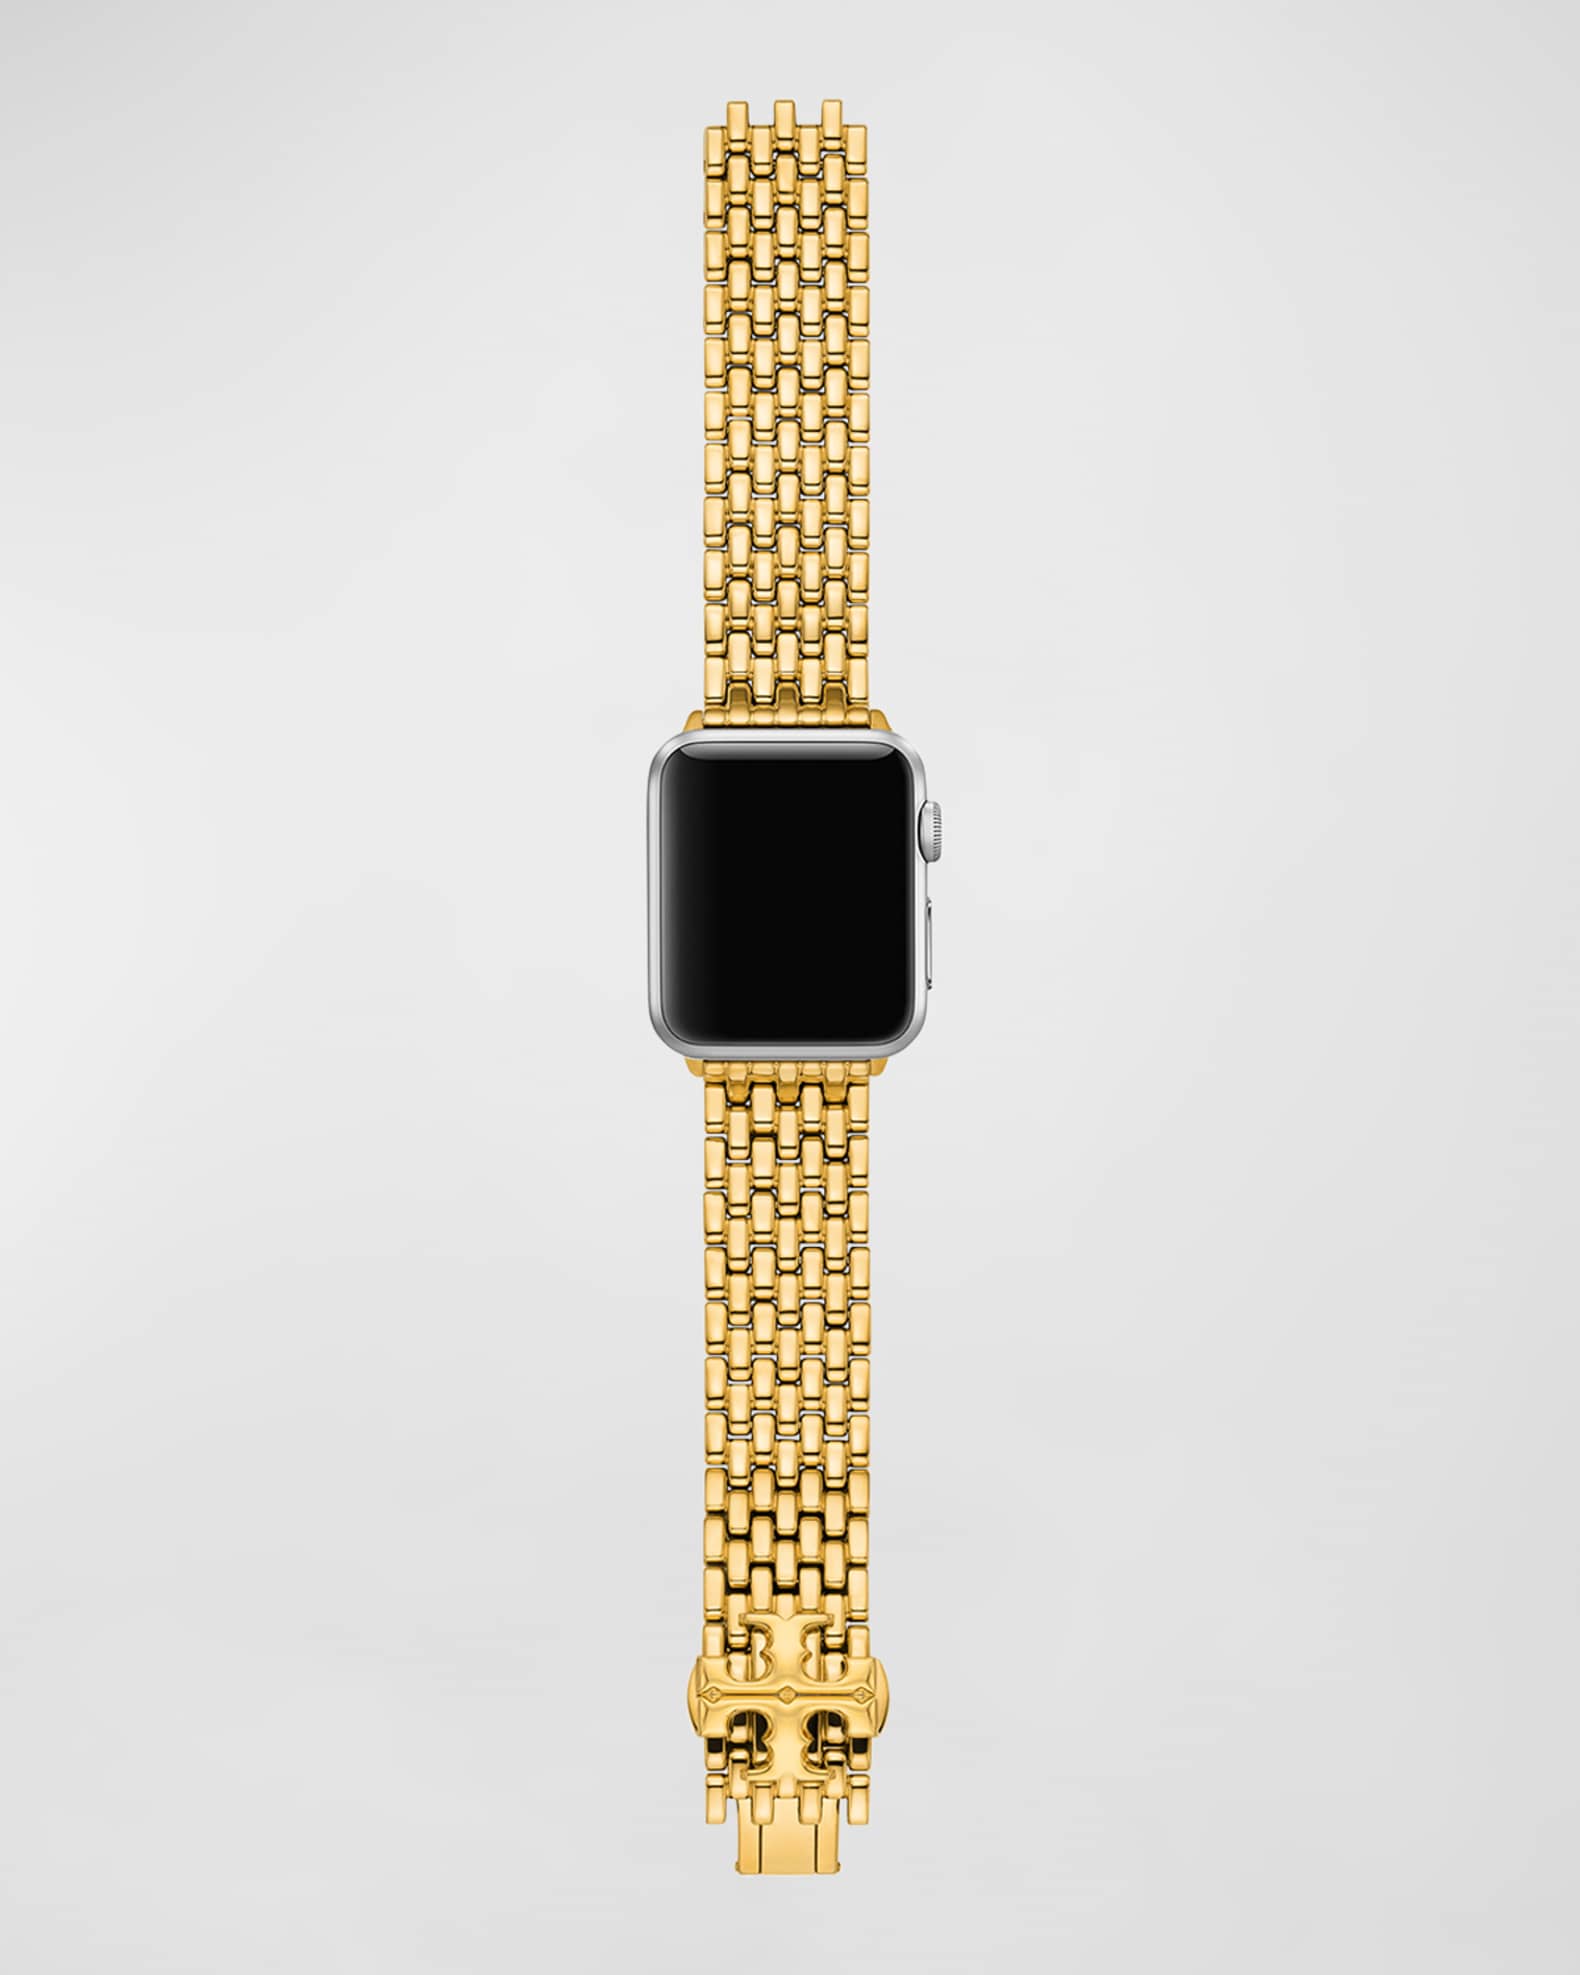 Tory Burch Gold-Tone Stainless Steel Band for Apple Watch, 38-41mm 